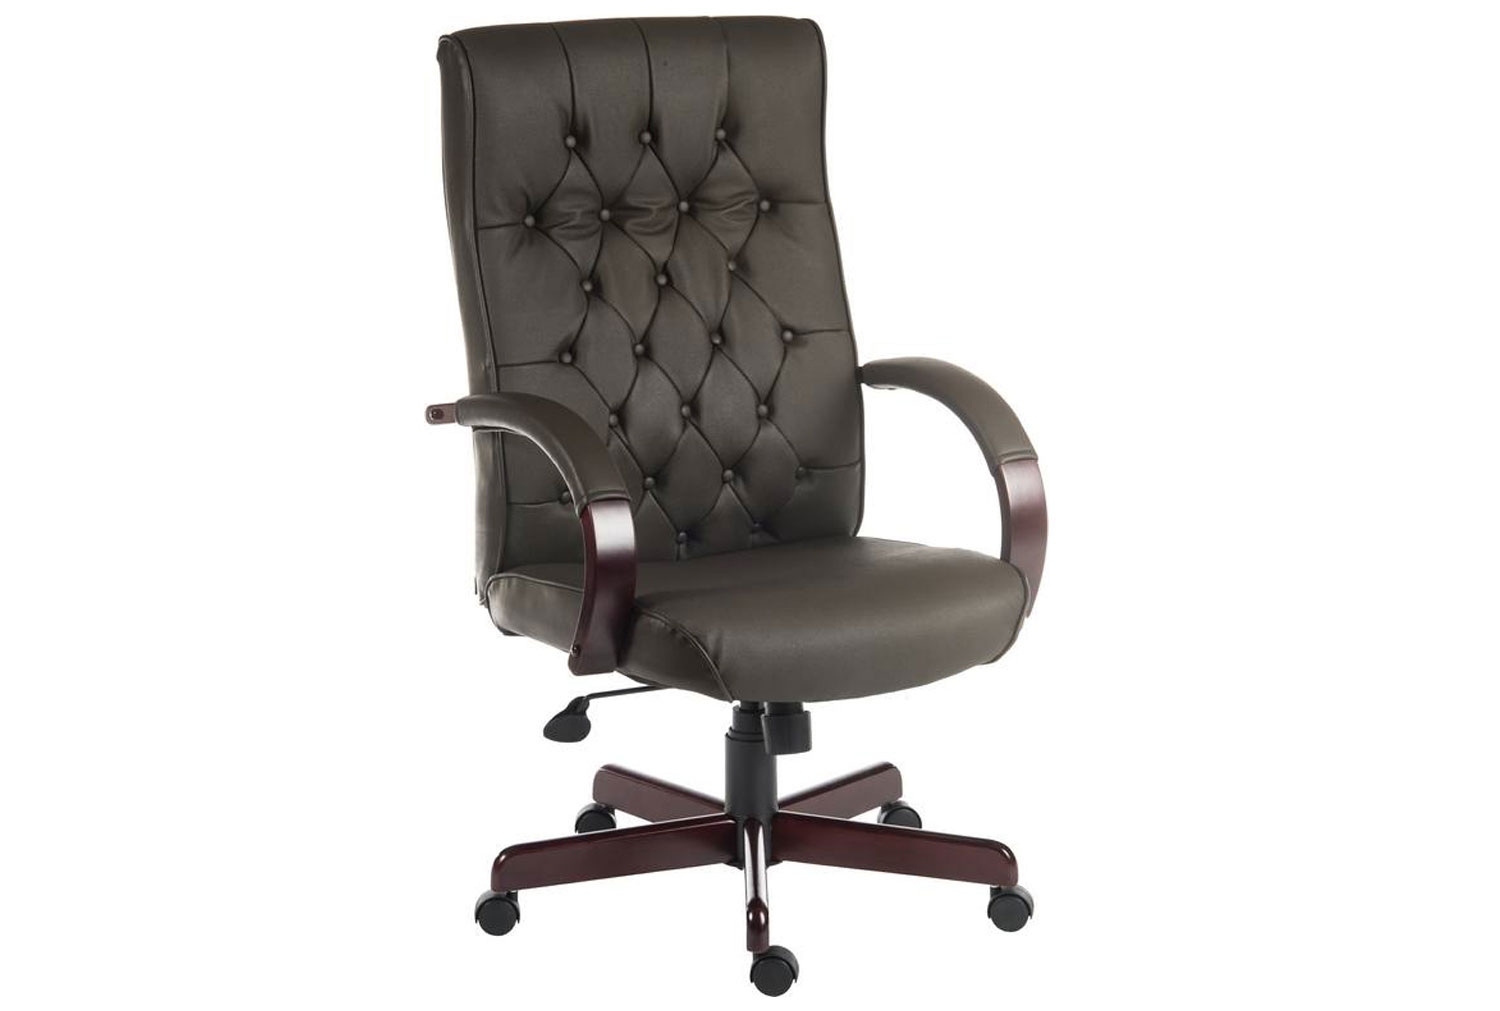 Warwick Leather Faced Executive Office Chair (Brown), Fully Installed